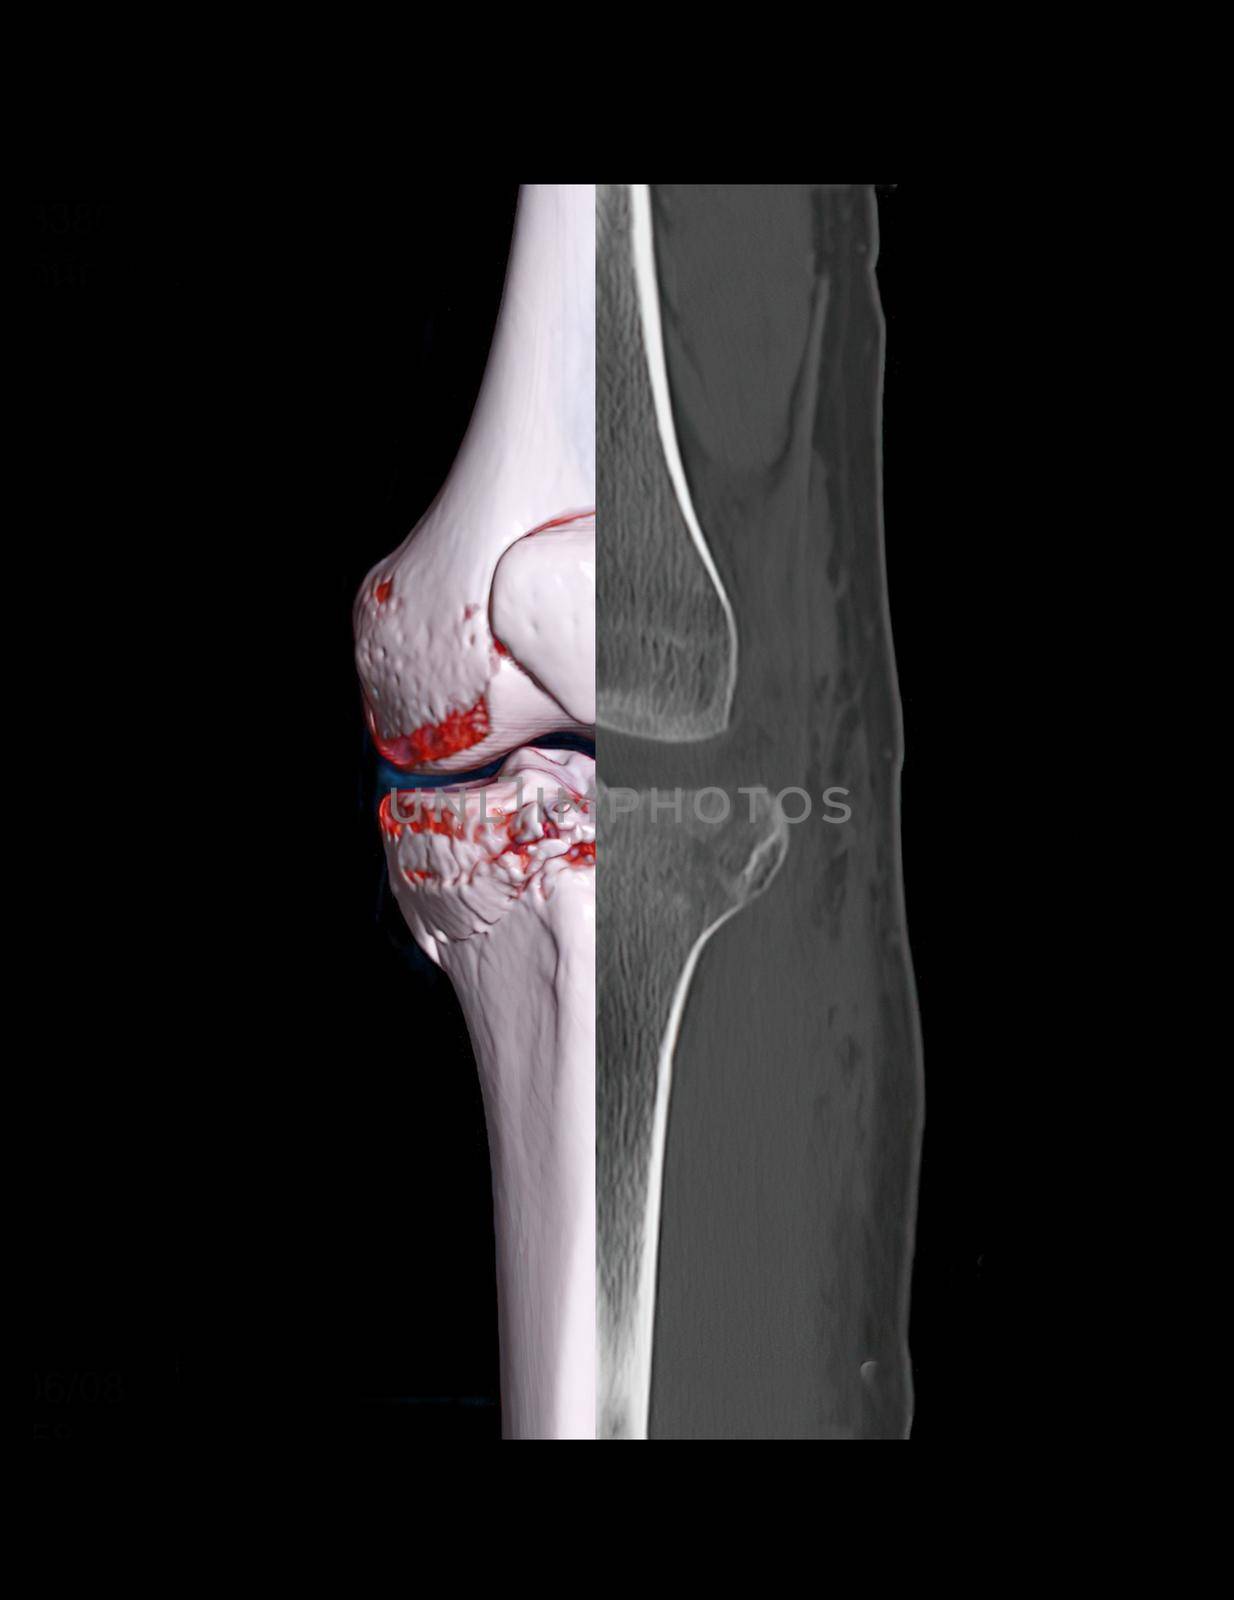 Compare of CT knee joint 3D rendering image and CT knee 2D isolated on black background showing fracture tibia bone.